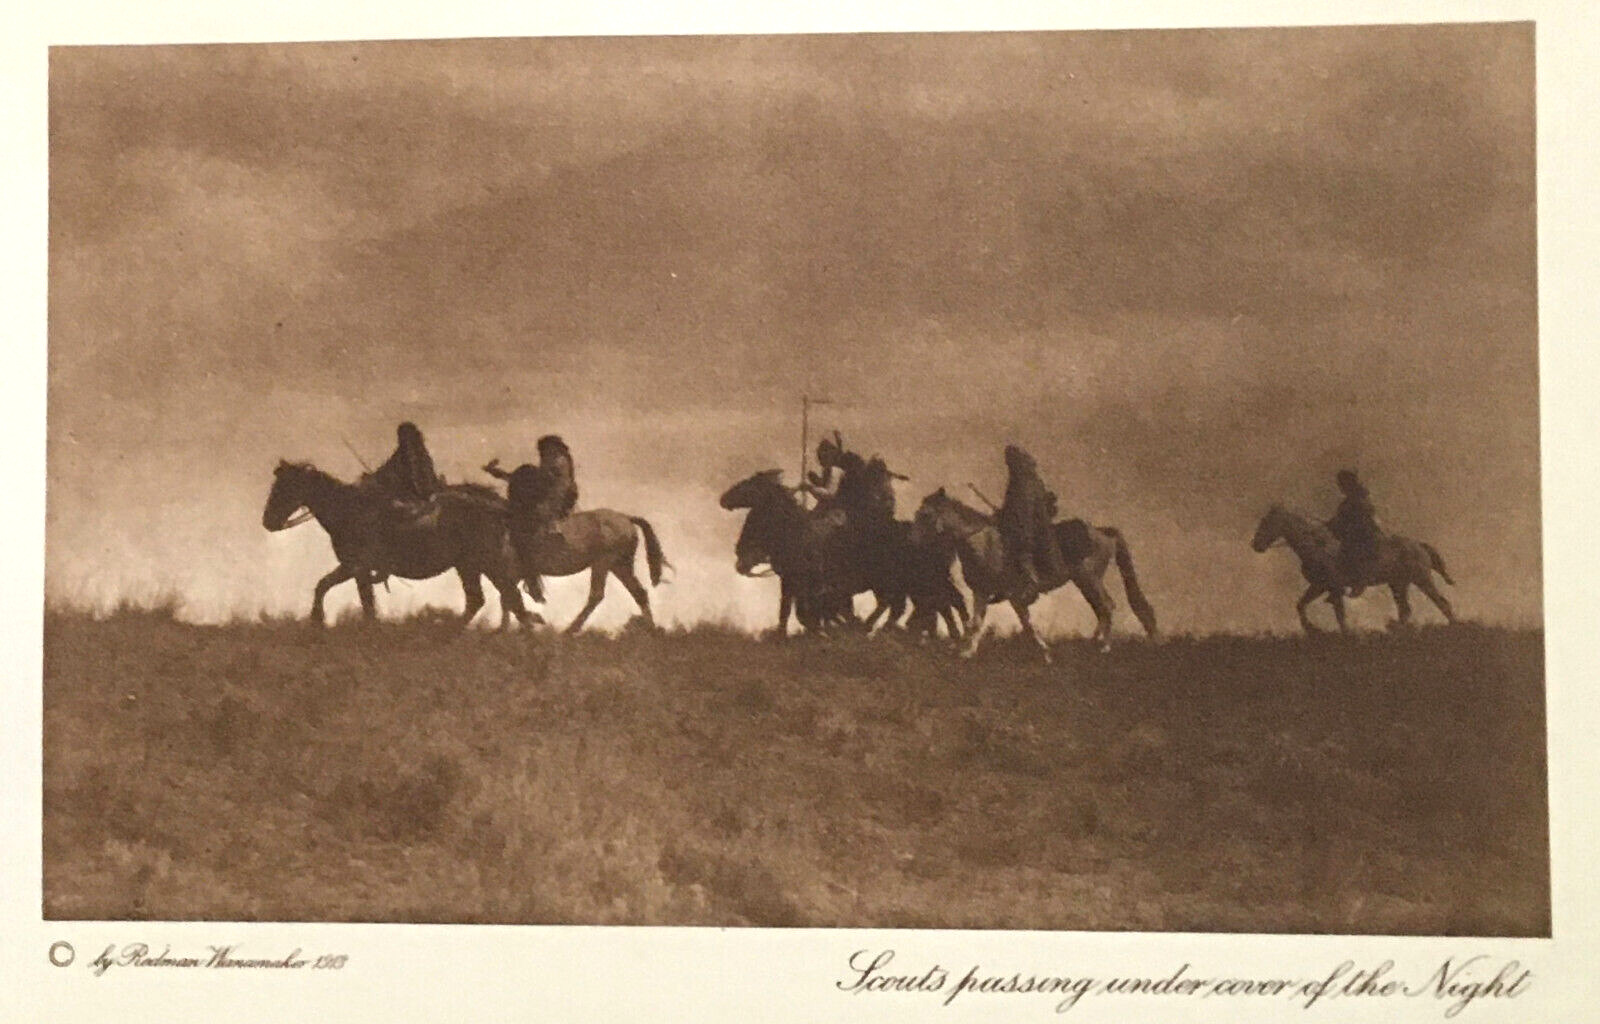 THE VANISHING RACE  - 60 - SCOUTS PASSING UNDER COVER OF NIGHT - PHOTOGRAVURE